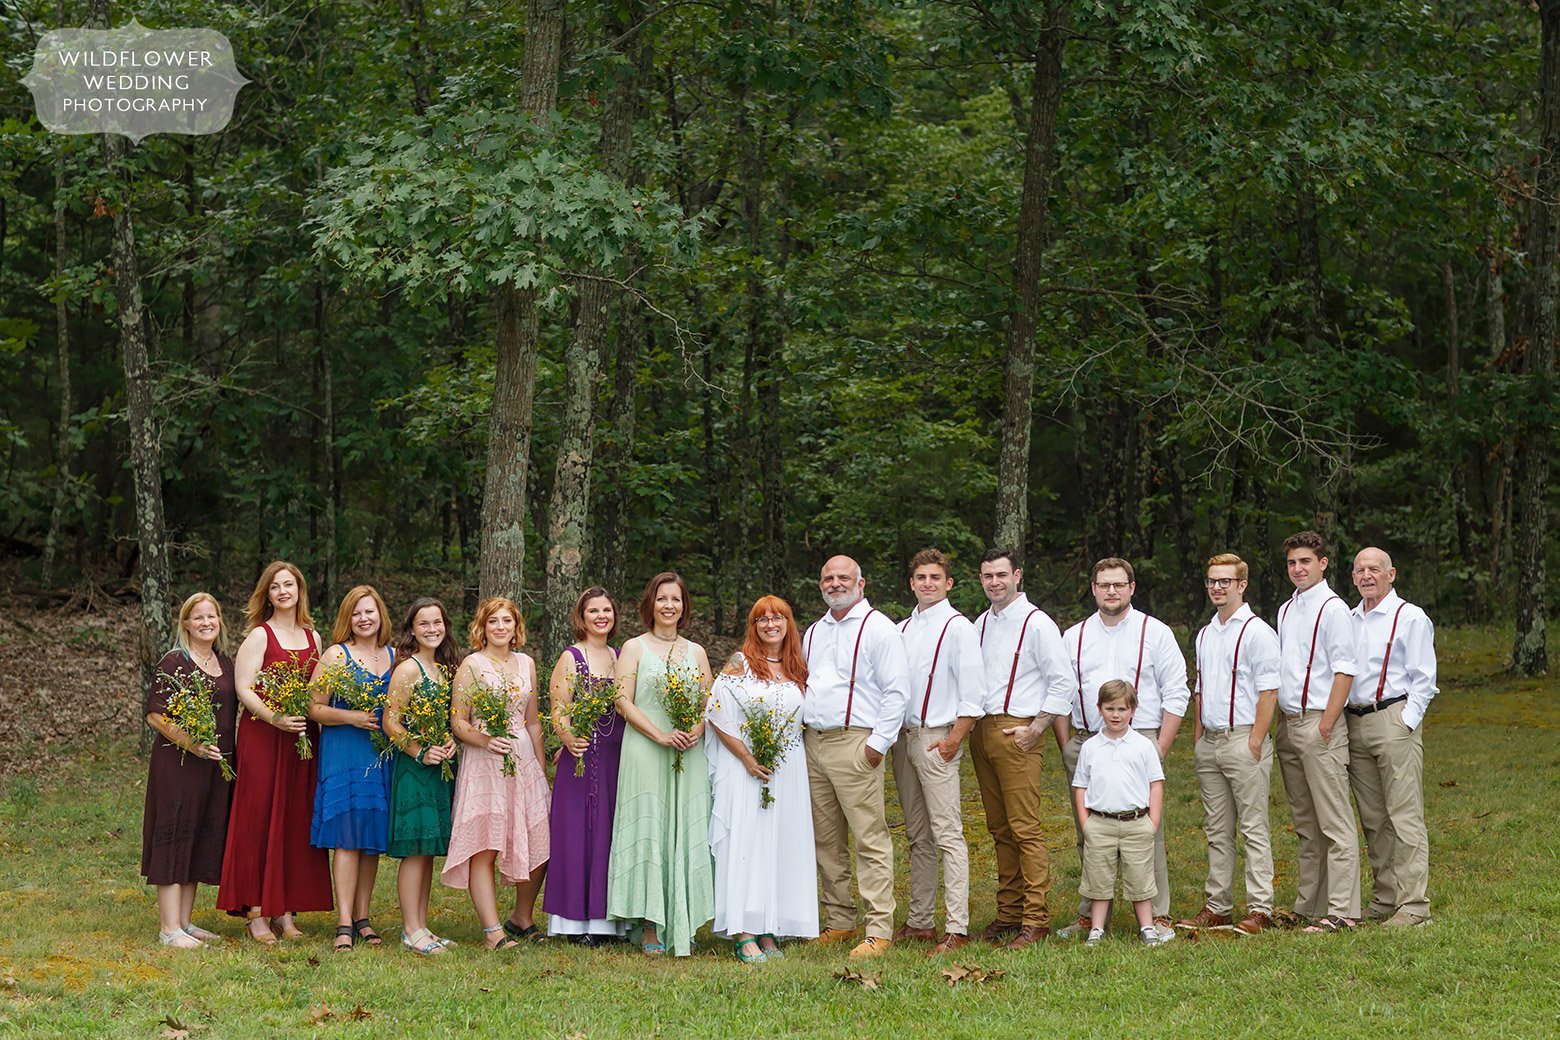 Ecclectic and colorful wedding party for this backyard wedding in southern Missouri.